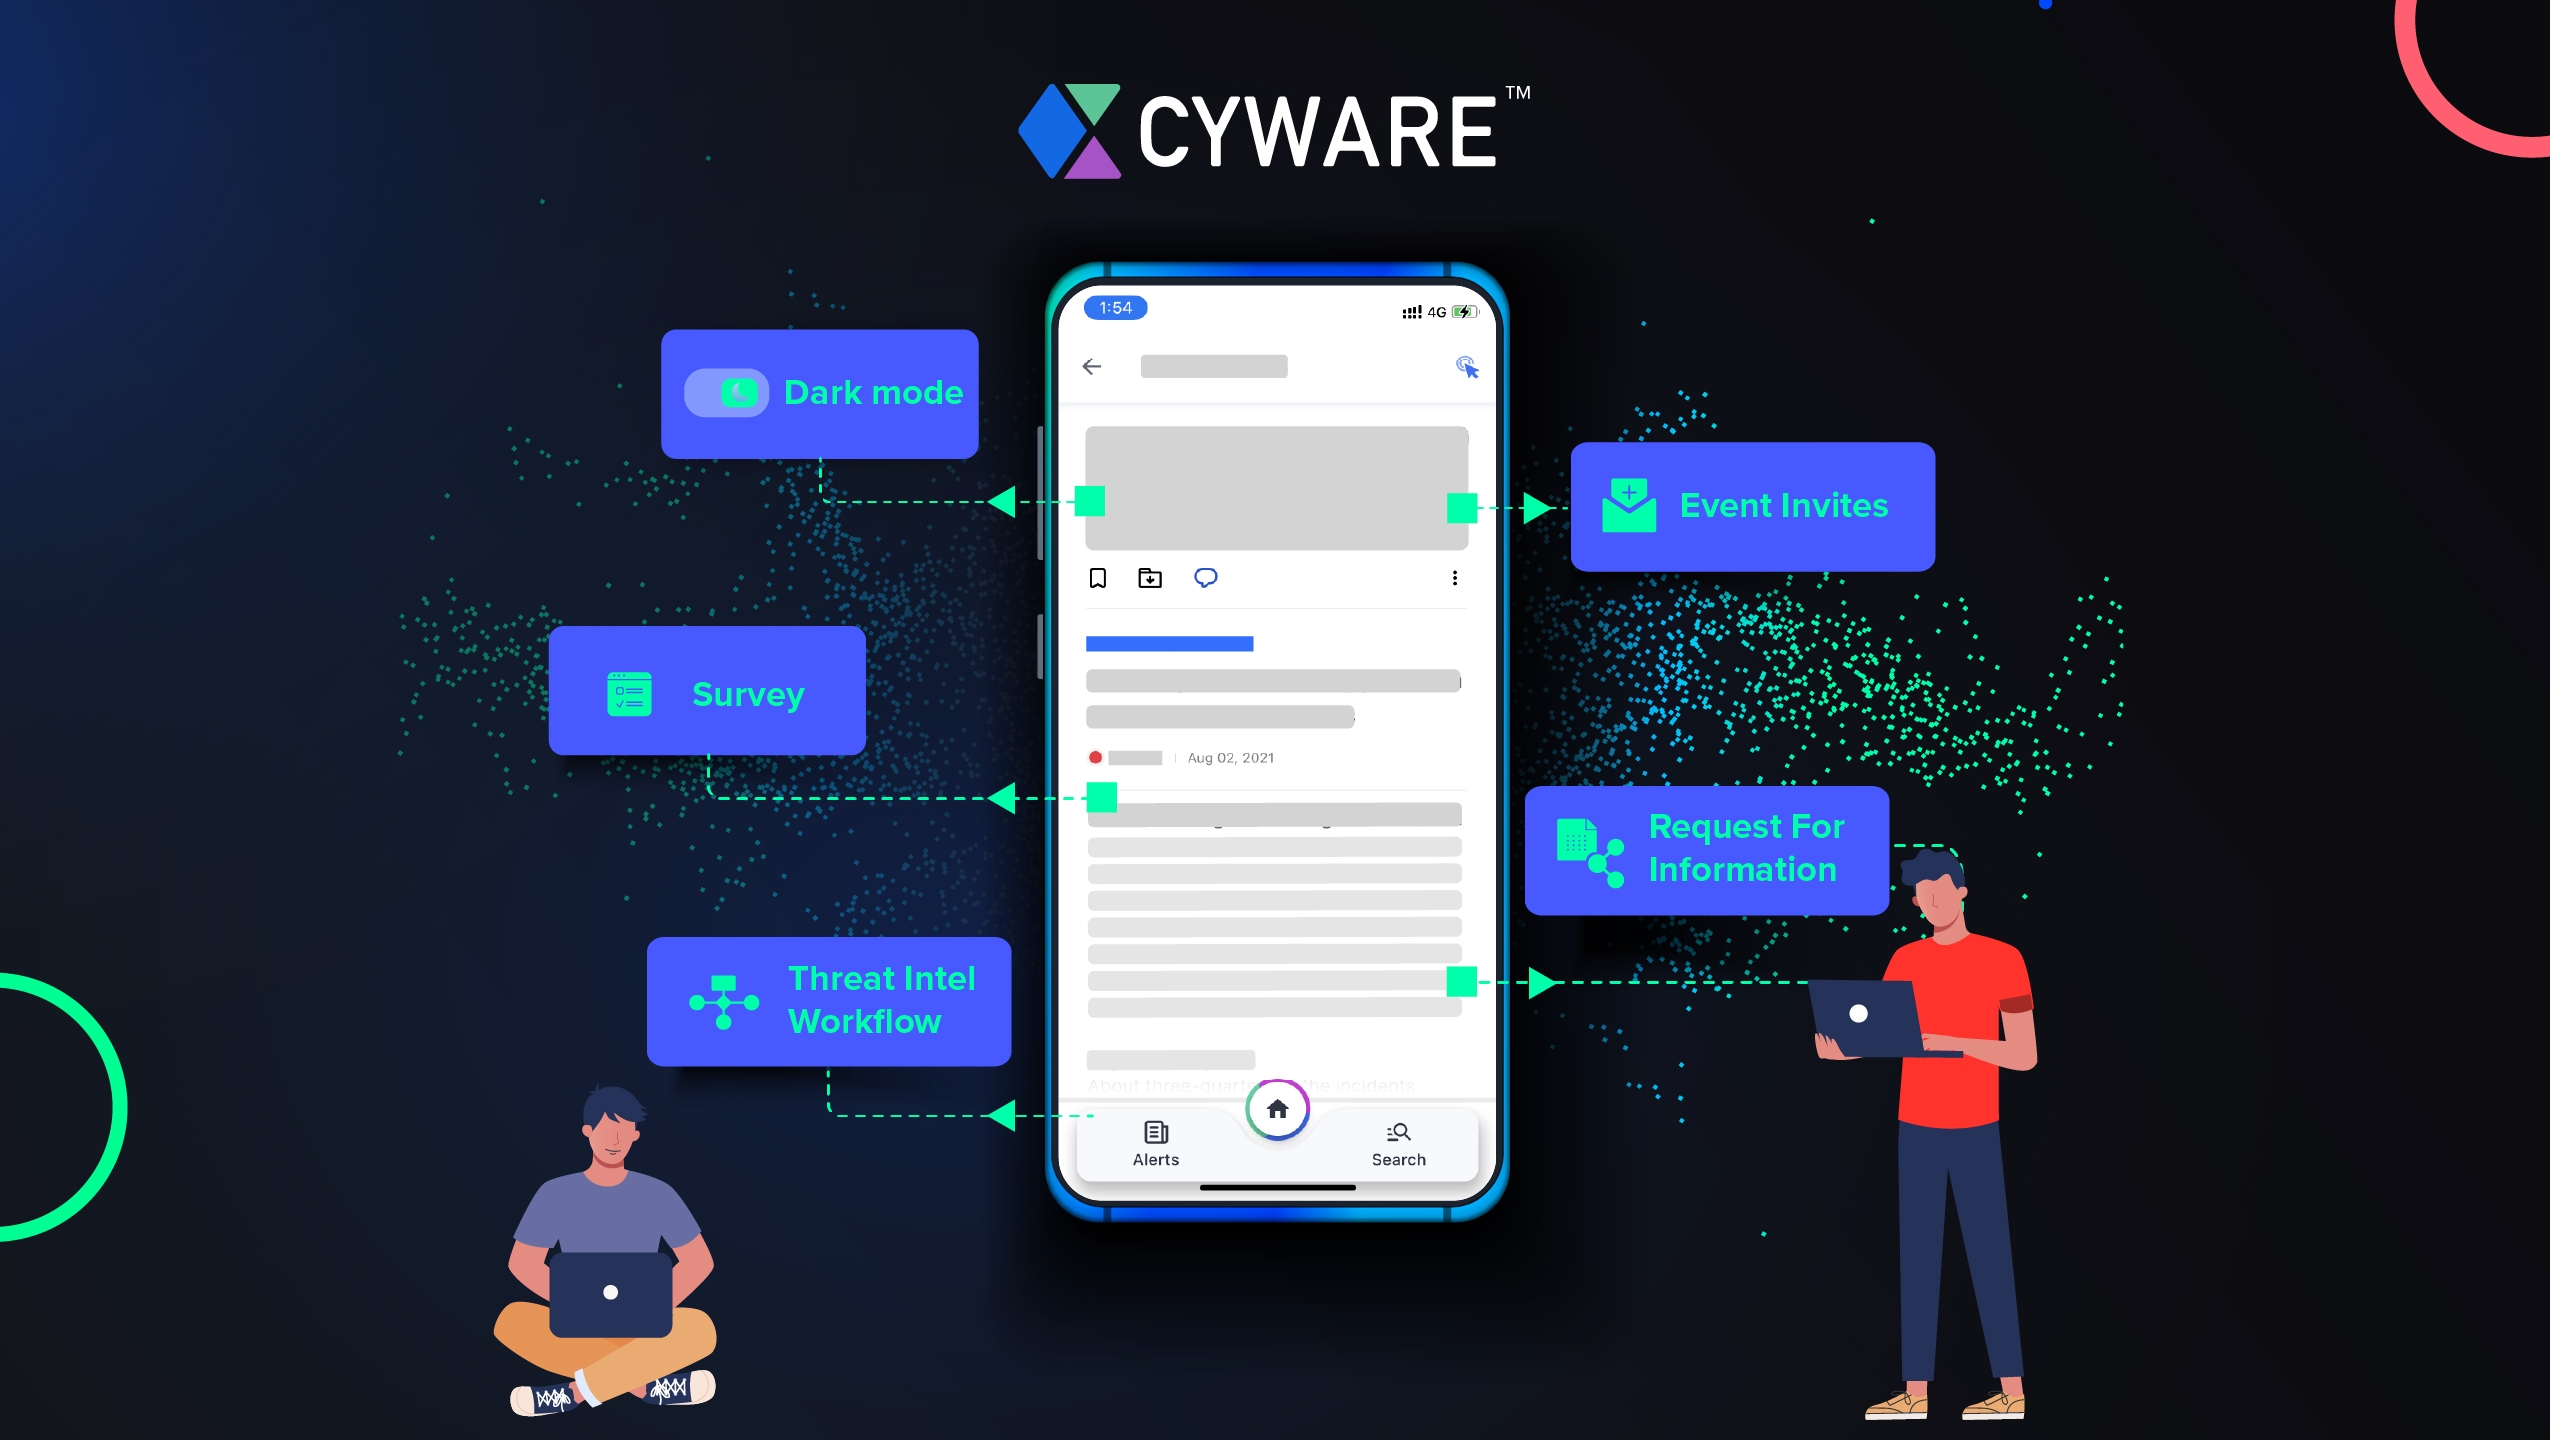 Cyware Optimizes Real-time Security Alerting and Threat Information Sharing on Mobile Devices